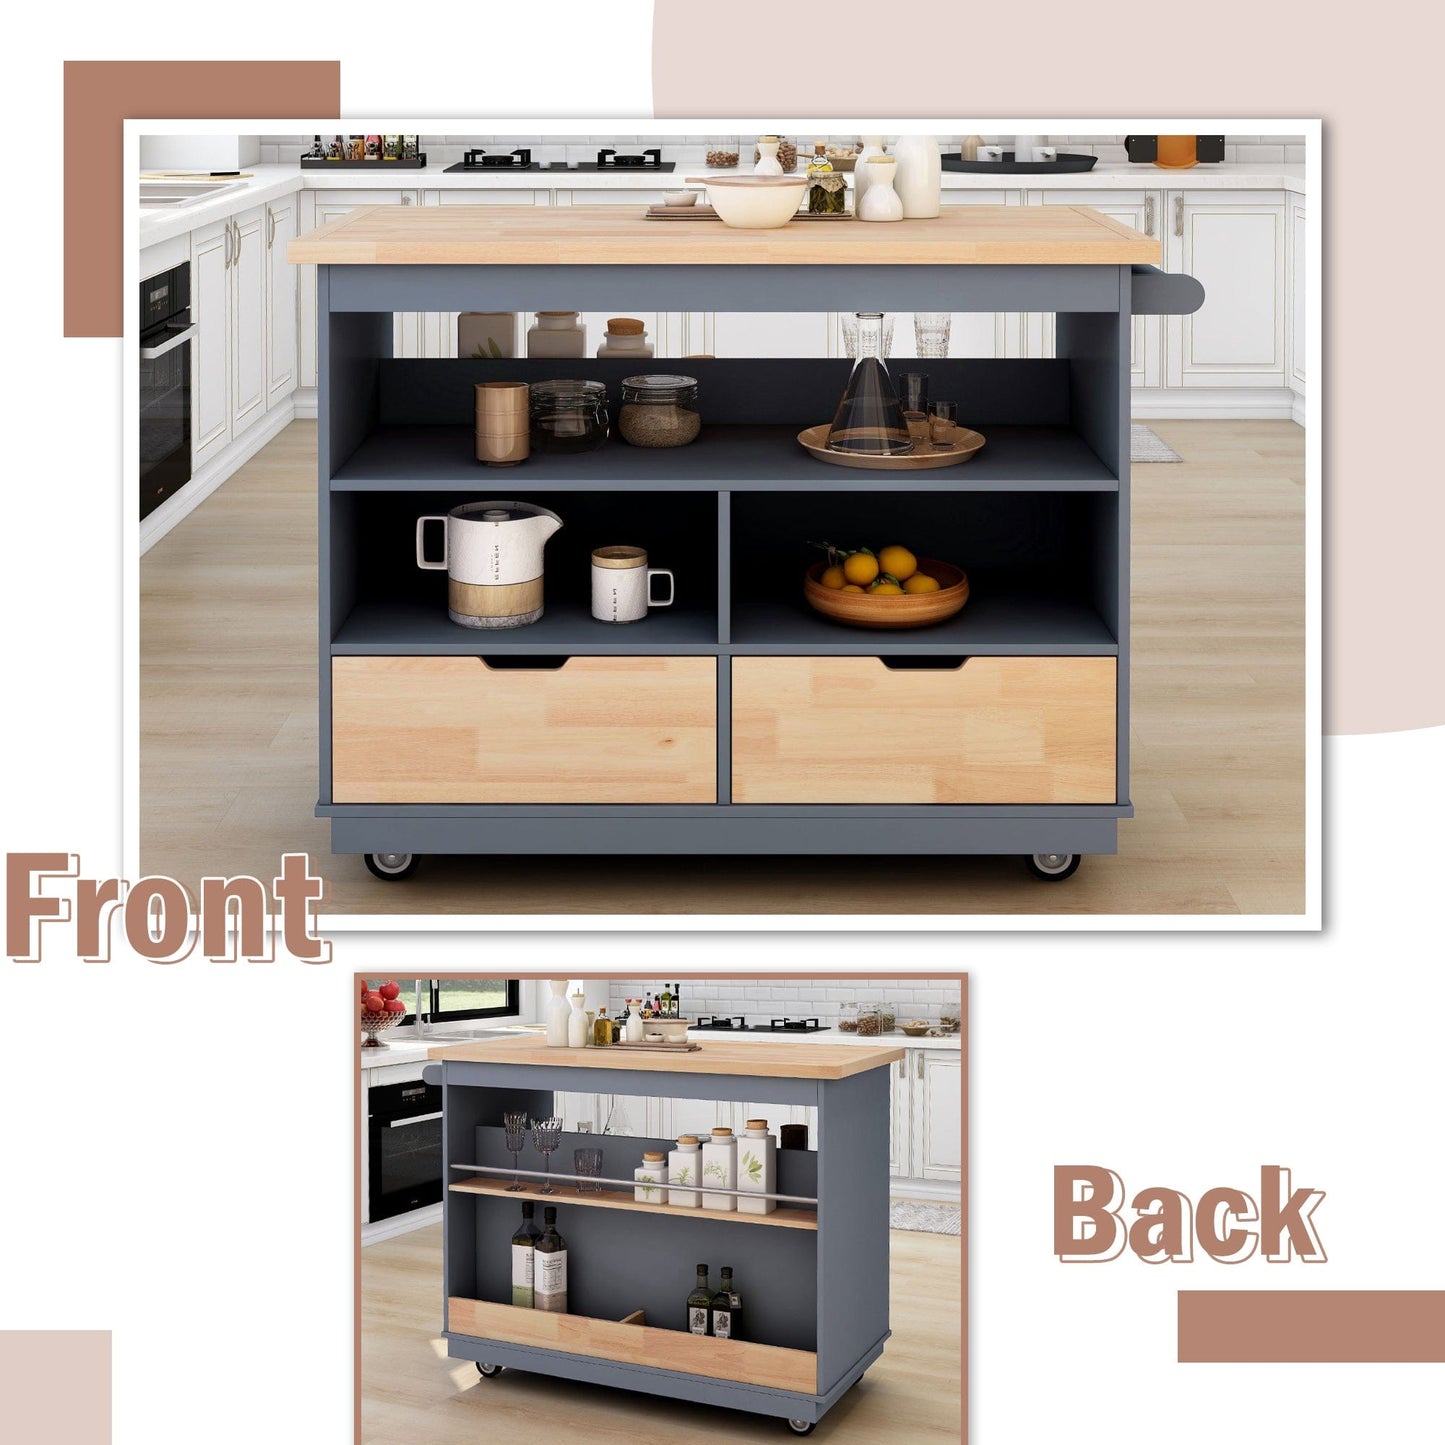 1st Choice Furniture Direct Kitchen Cart 1st Choice Kitchen Cart Rolling Mobile Island Solid Wood Top in Grey Blue